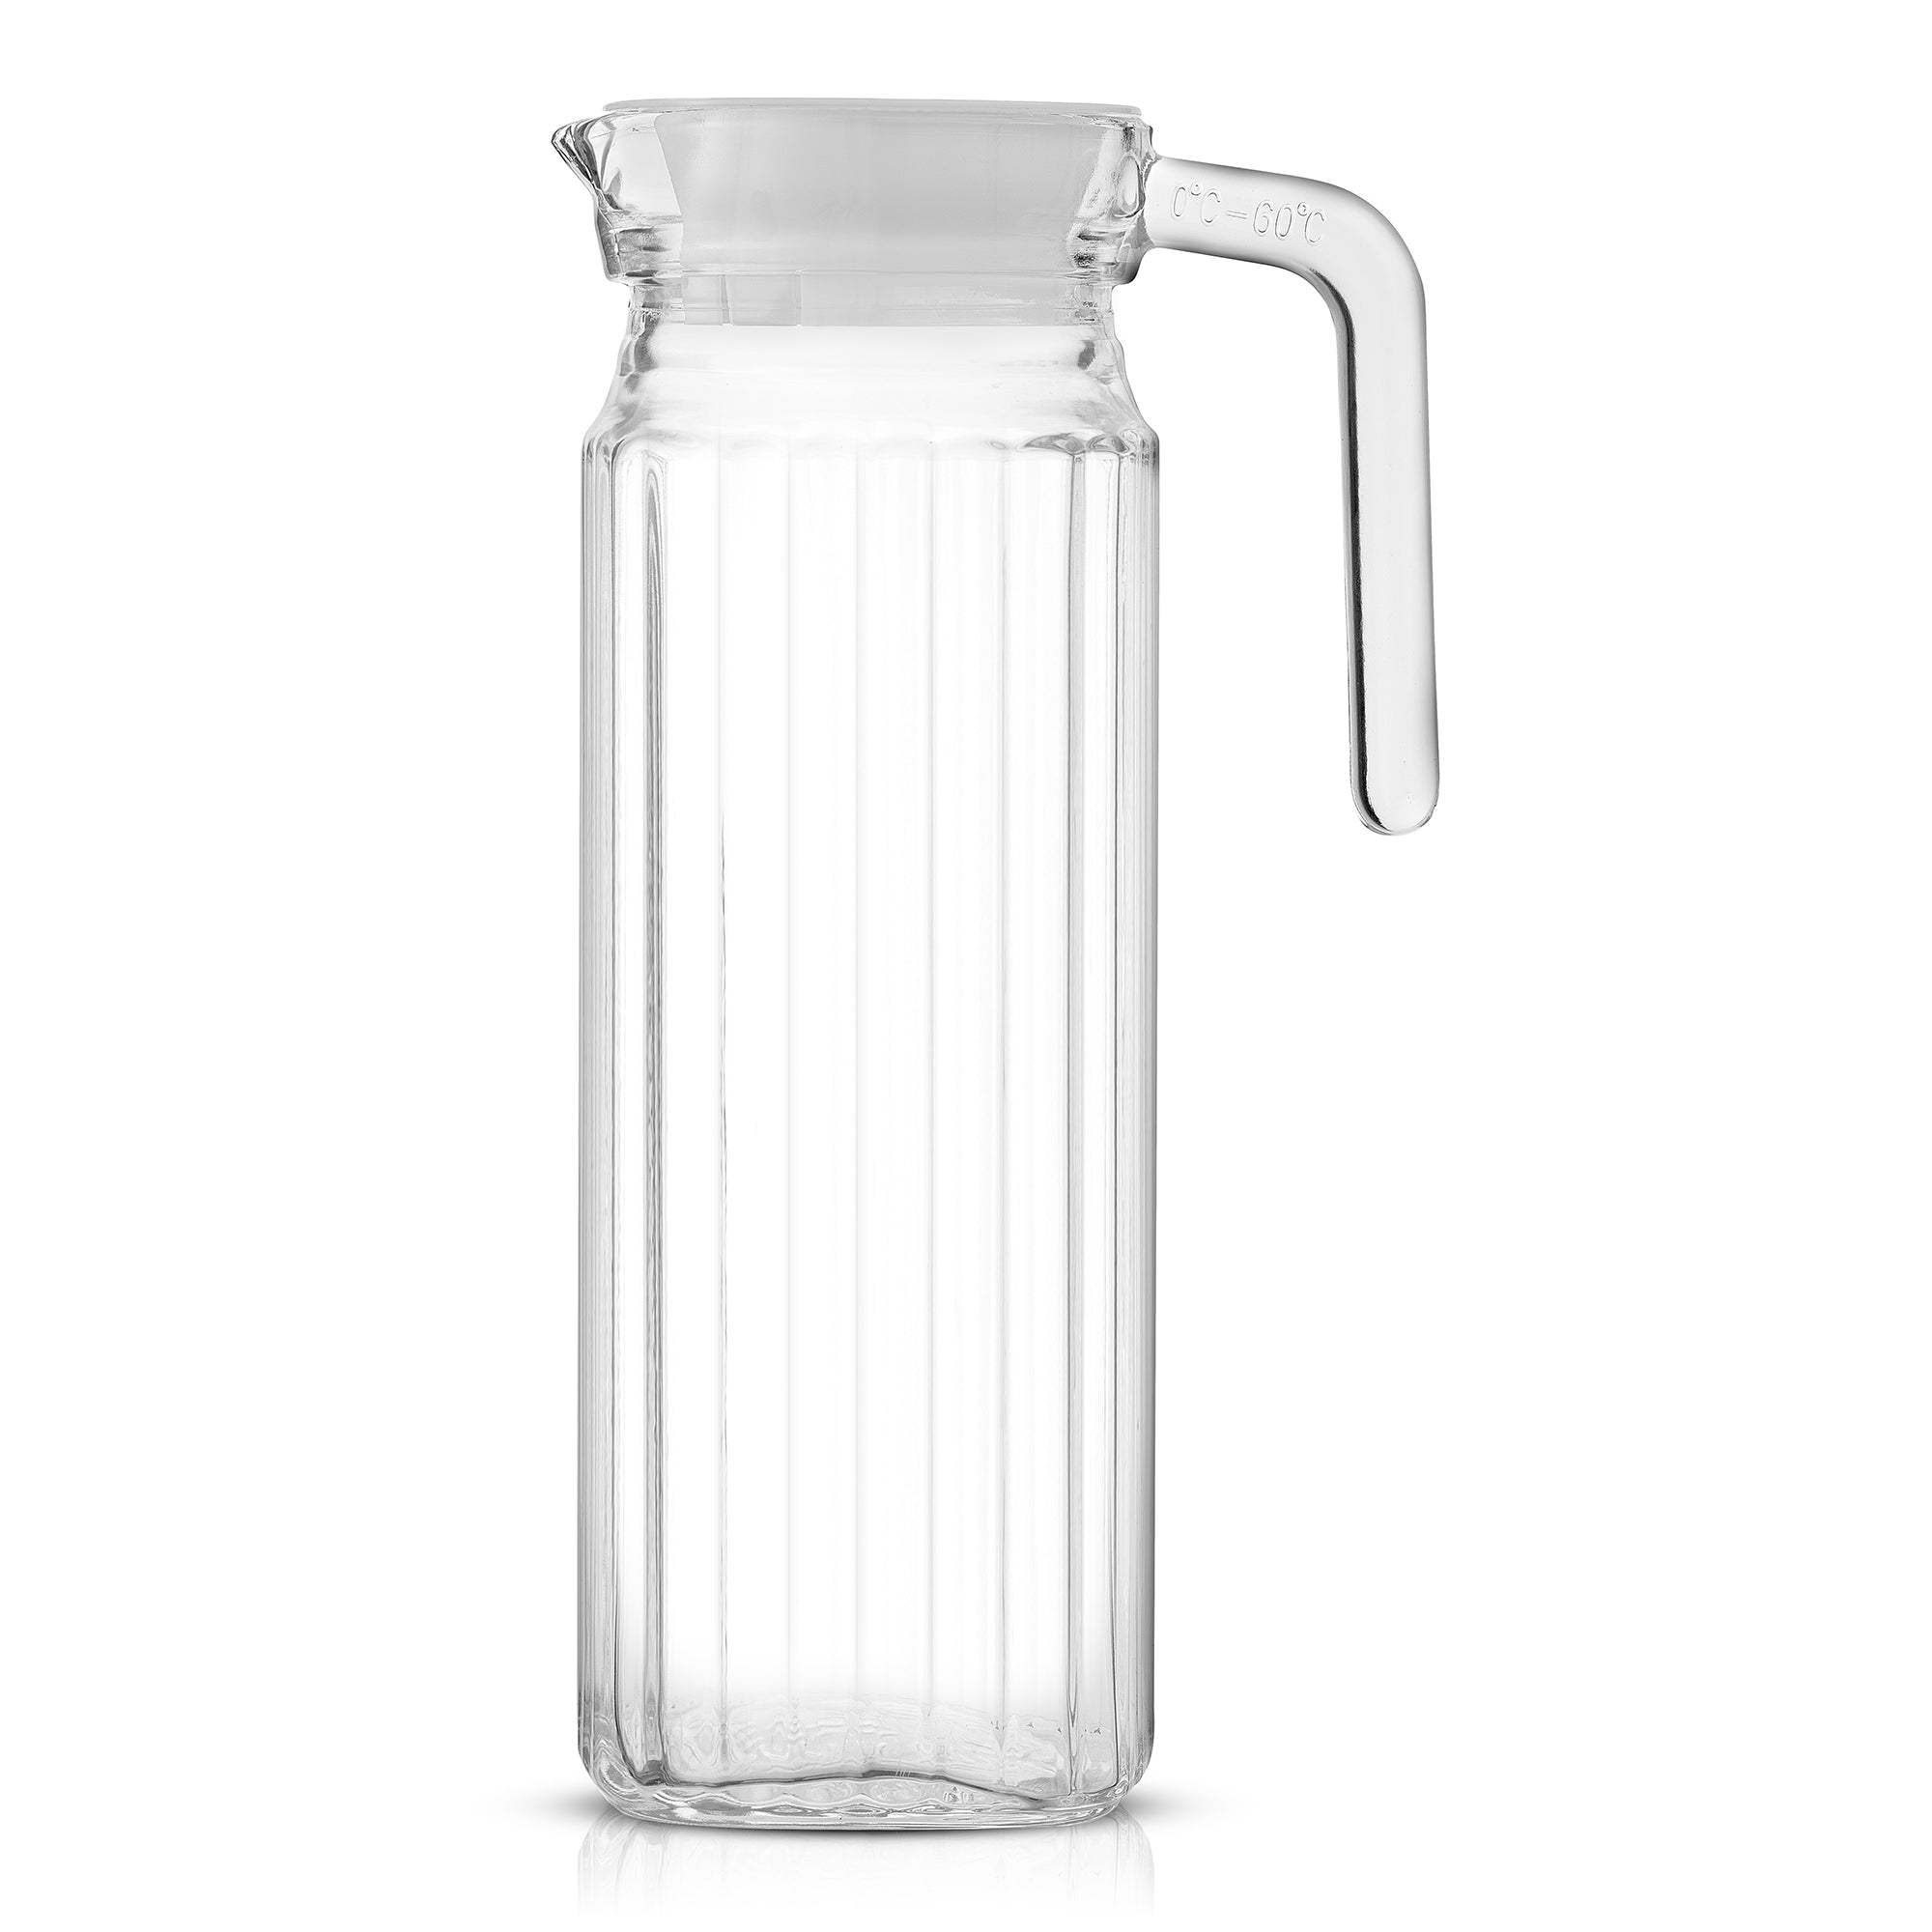 A clear glass fluted pitcher with a handle and lid sits on a white background. This is a 40-ounce JoyJolt Beverage Serveware Glass Pitcher.